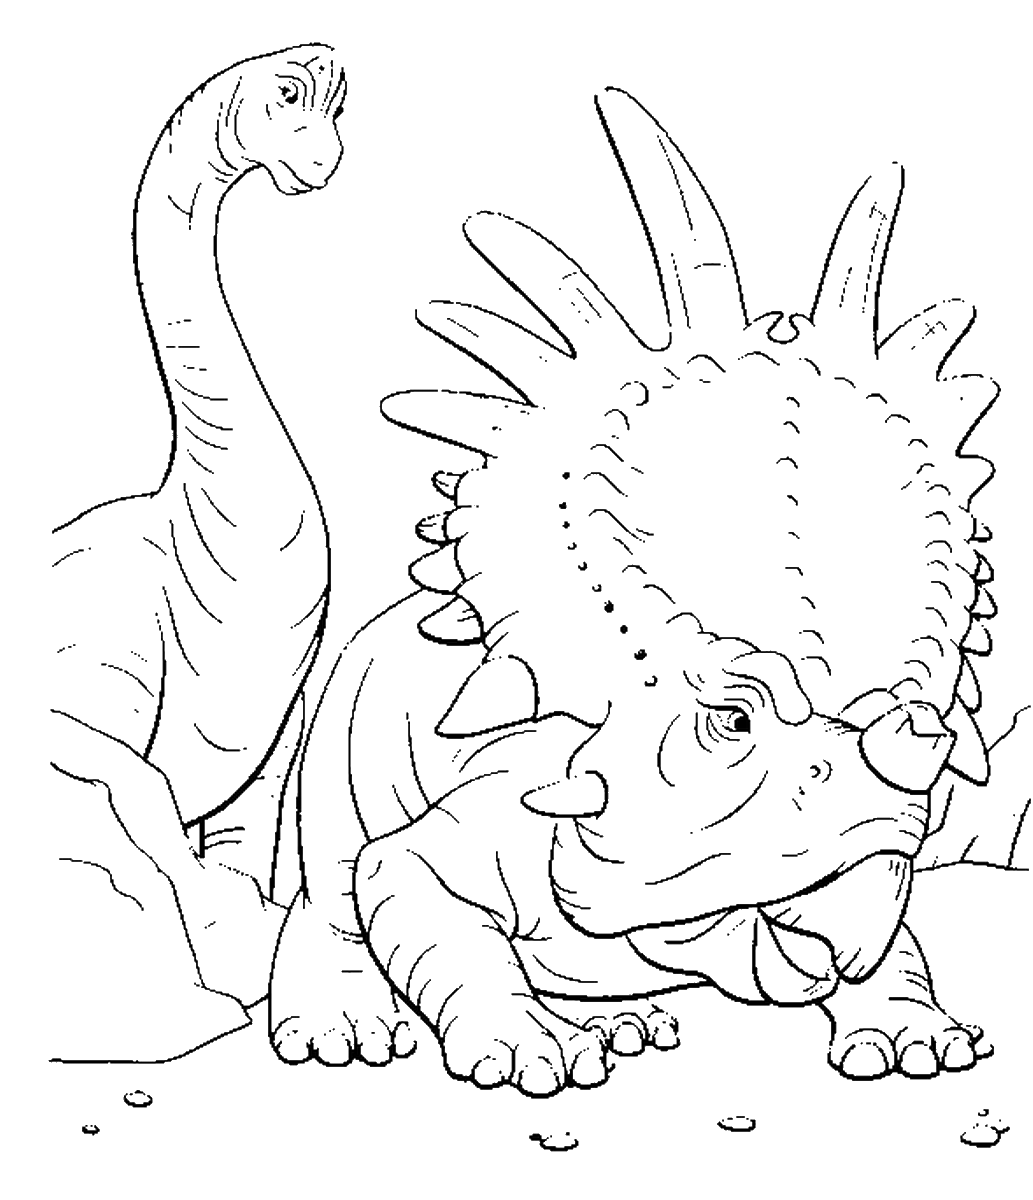 Jurassic Park Coloring Pages Map | Dinosaur World